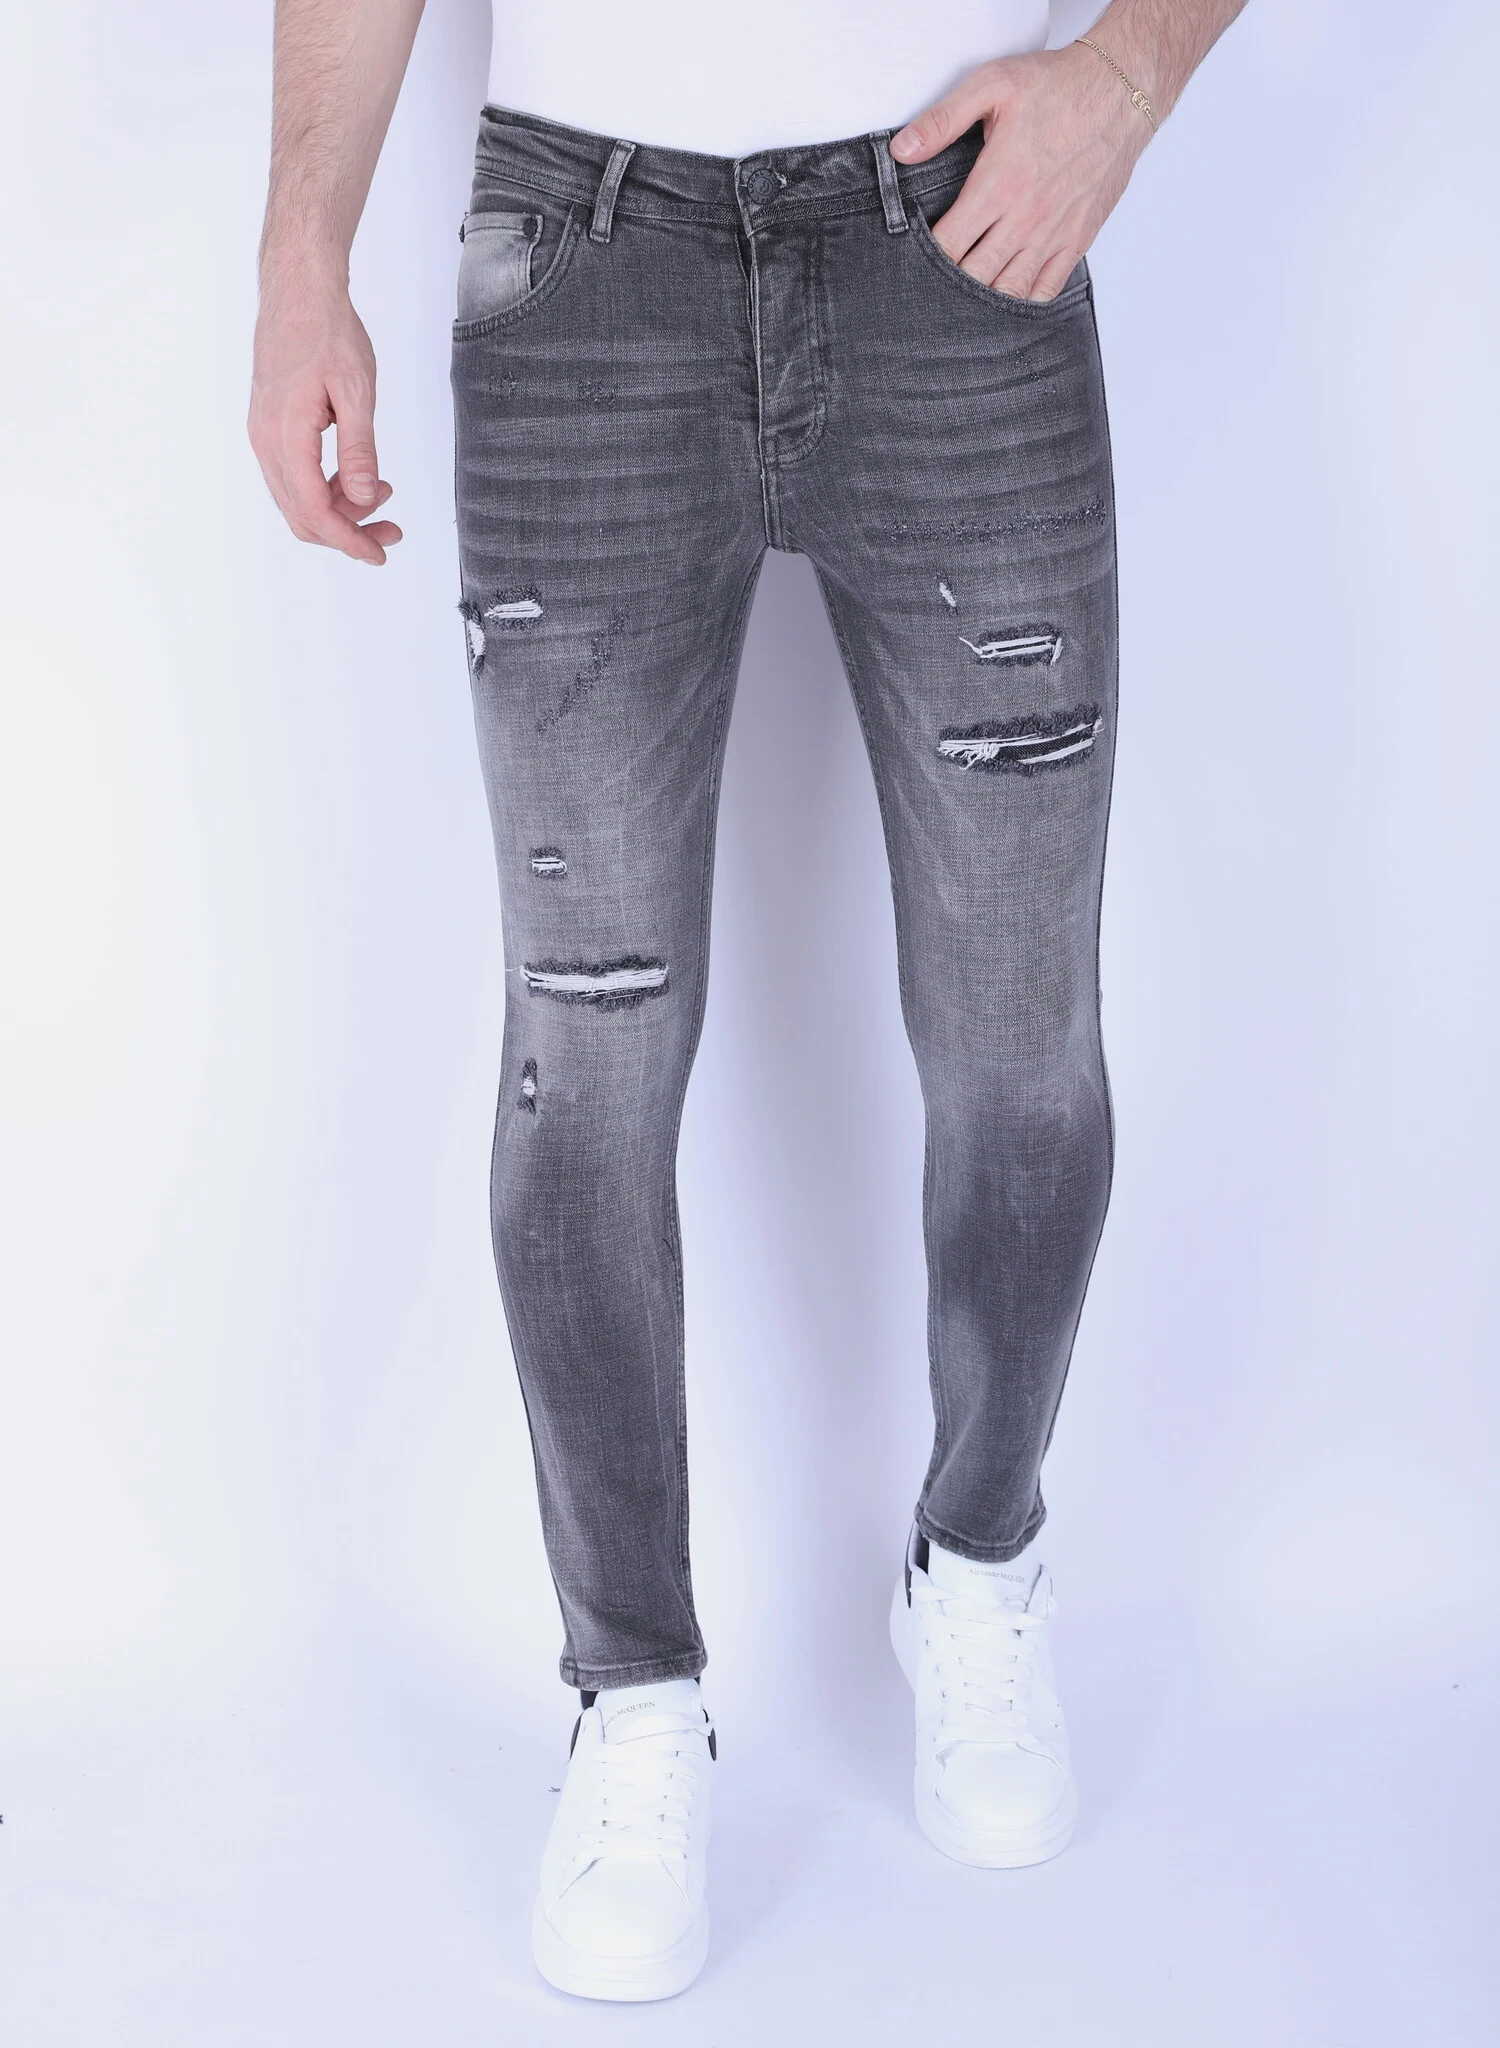 Local Fanatic Stonewashed slimfit jeans met stretch